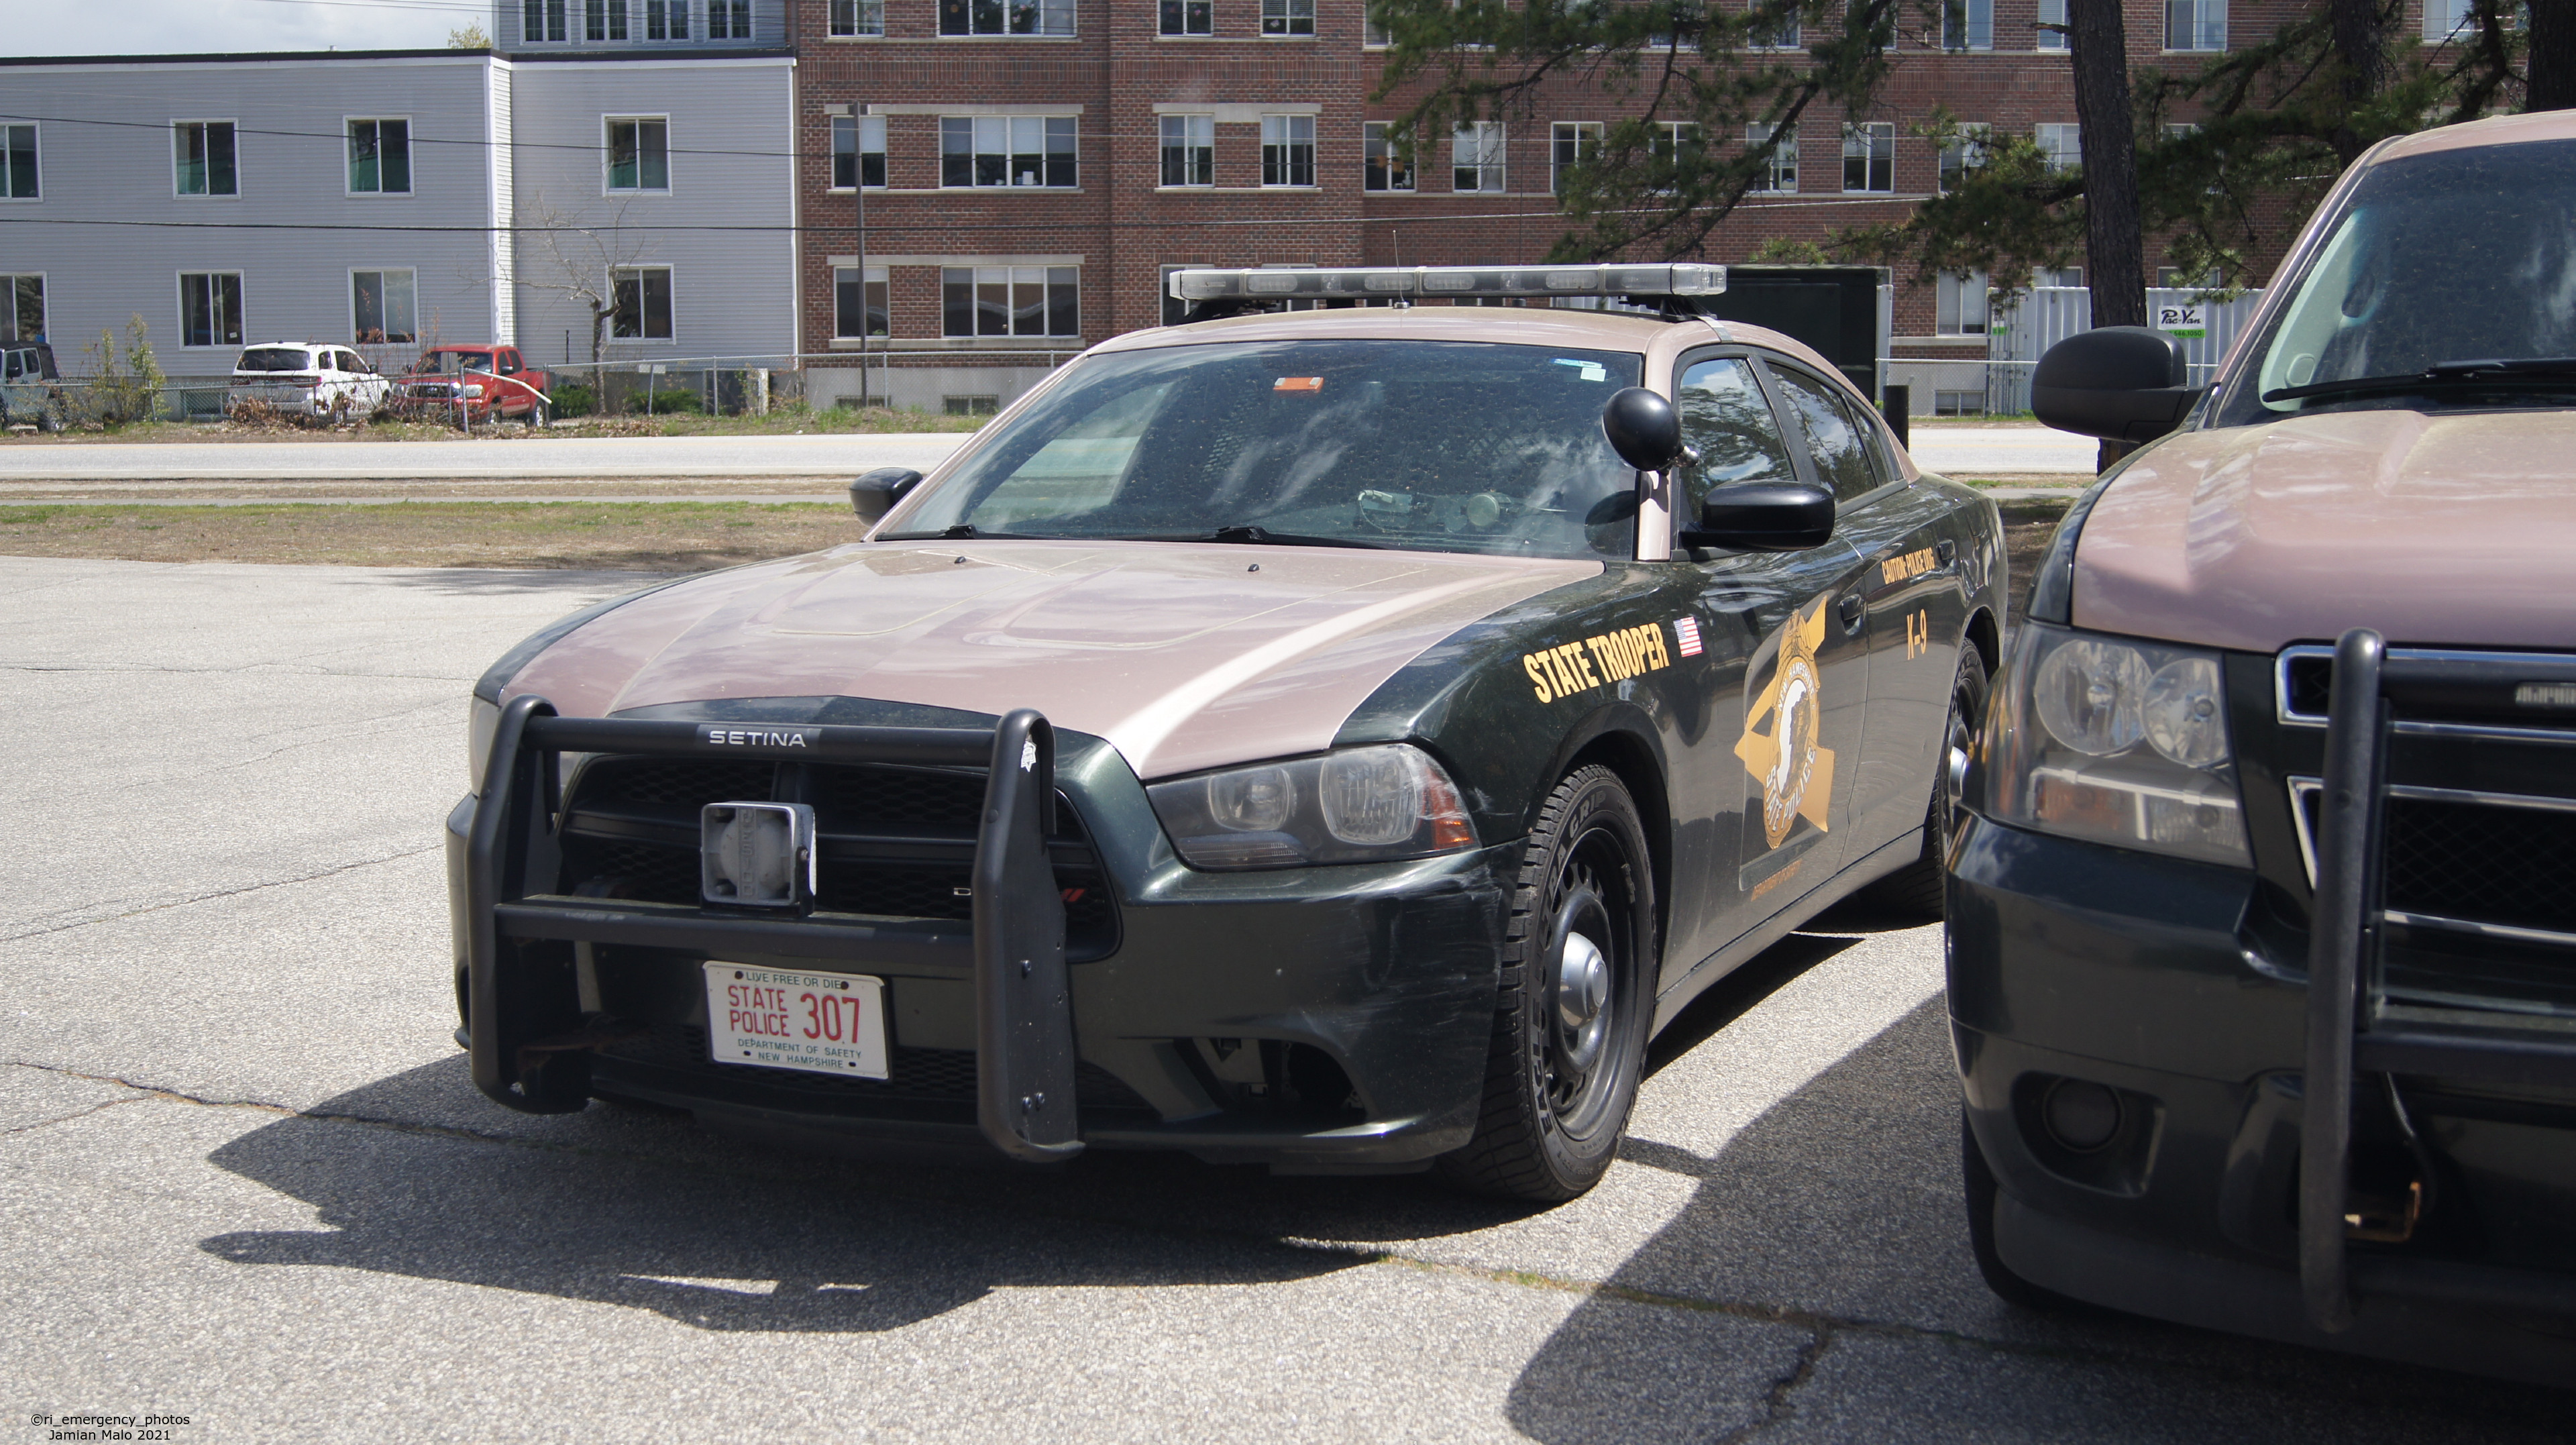 A photo  of New Hampshire State Police
            Cruiser 307, a 2014 Dodge Charger             taken by Jamian Malo